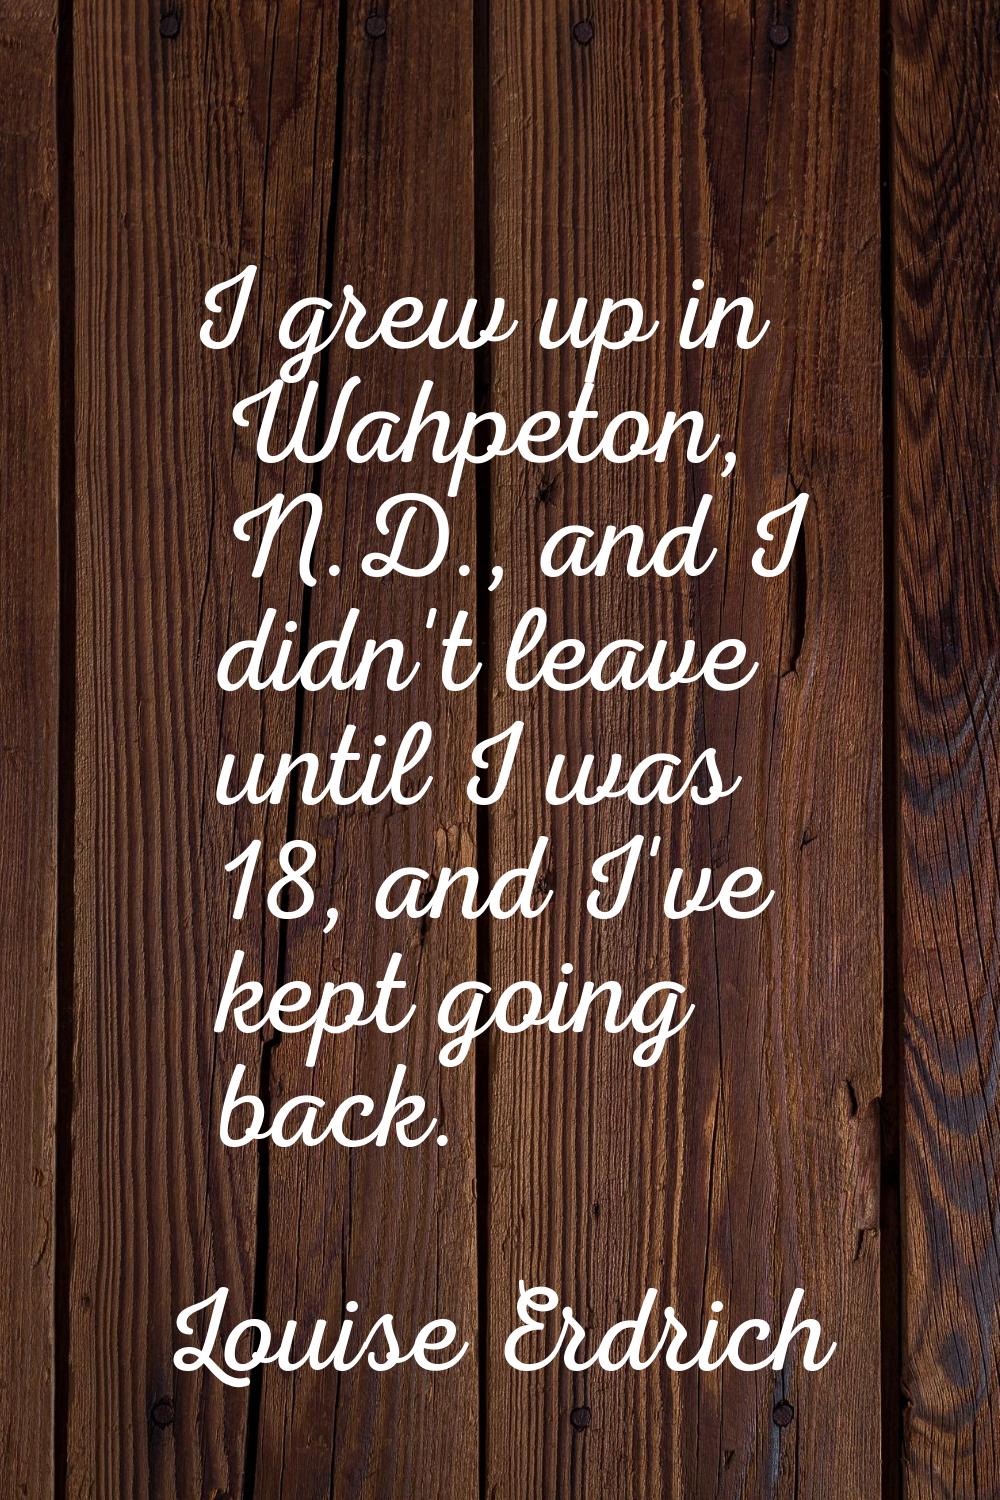 I grew up in Wahpeton, N.D., and I didn't leave until I was 18, and I've kept going back.